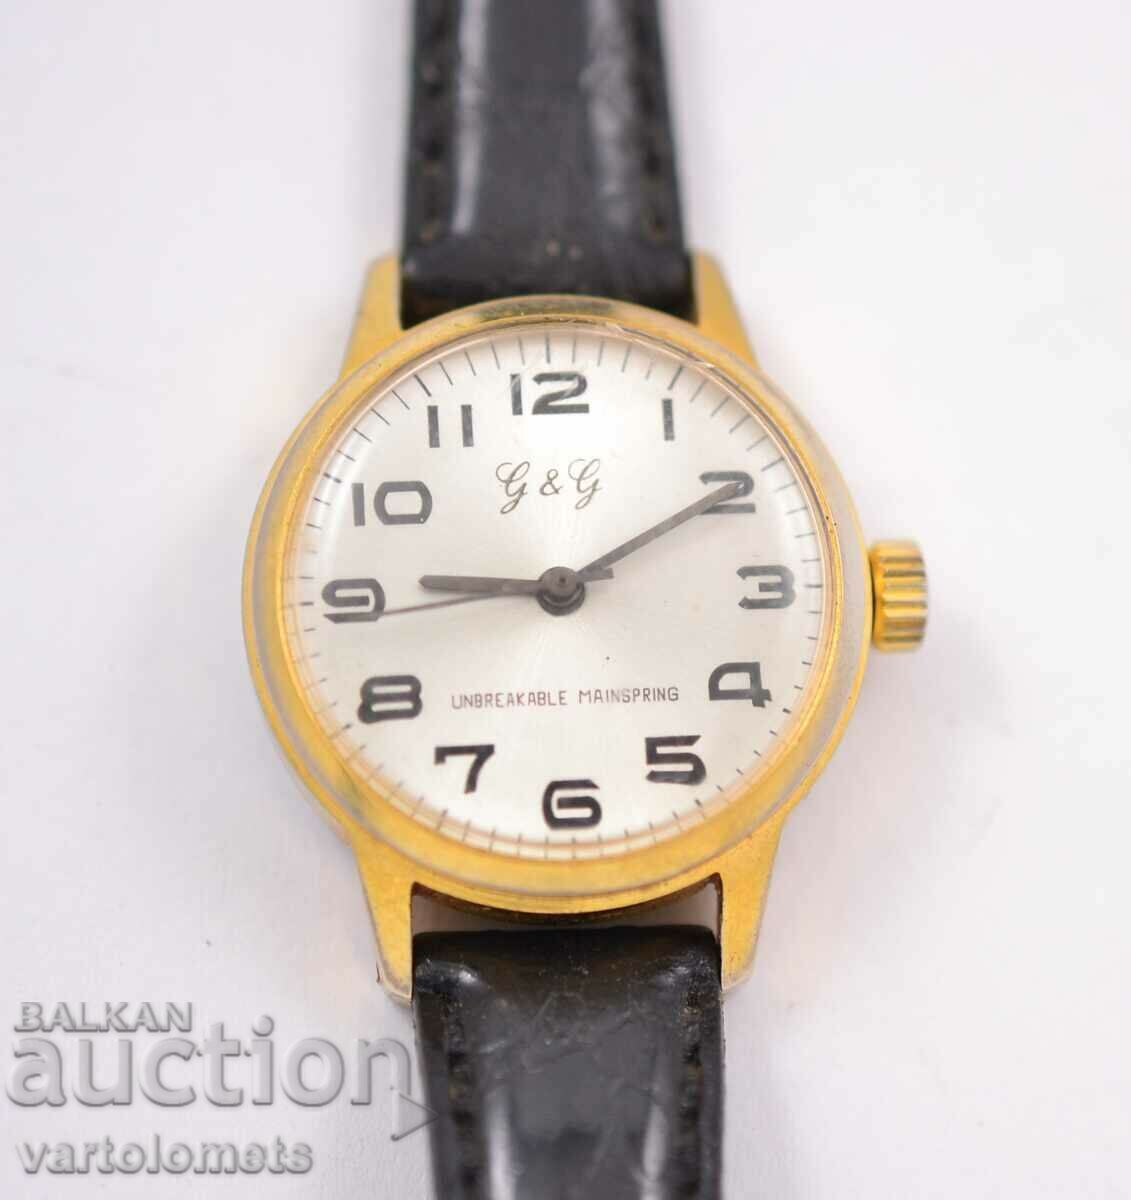 G & G Swiss made ladies watch with gold plating - working